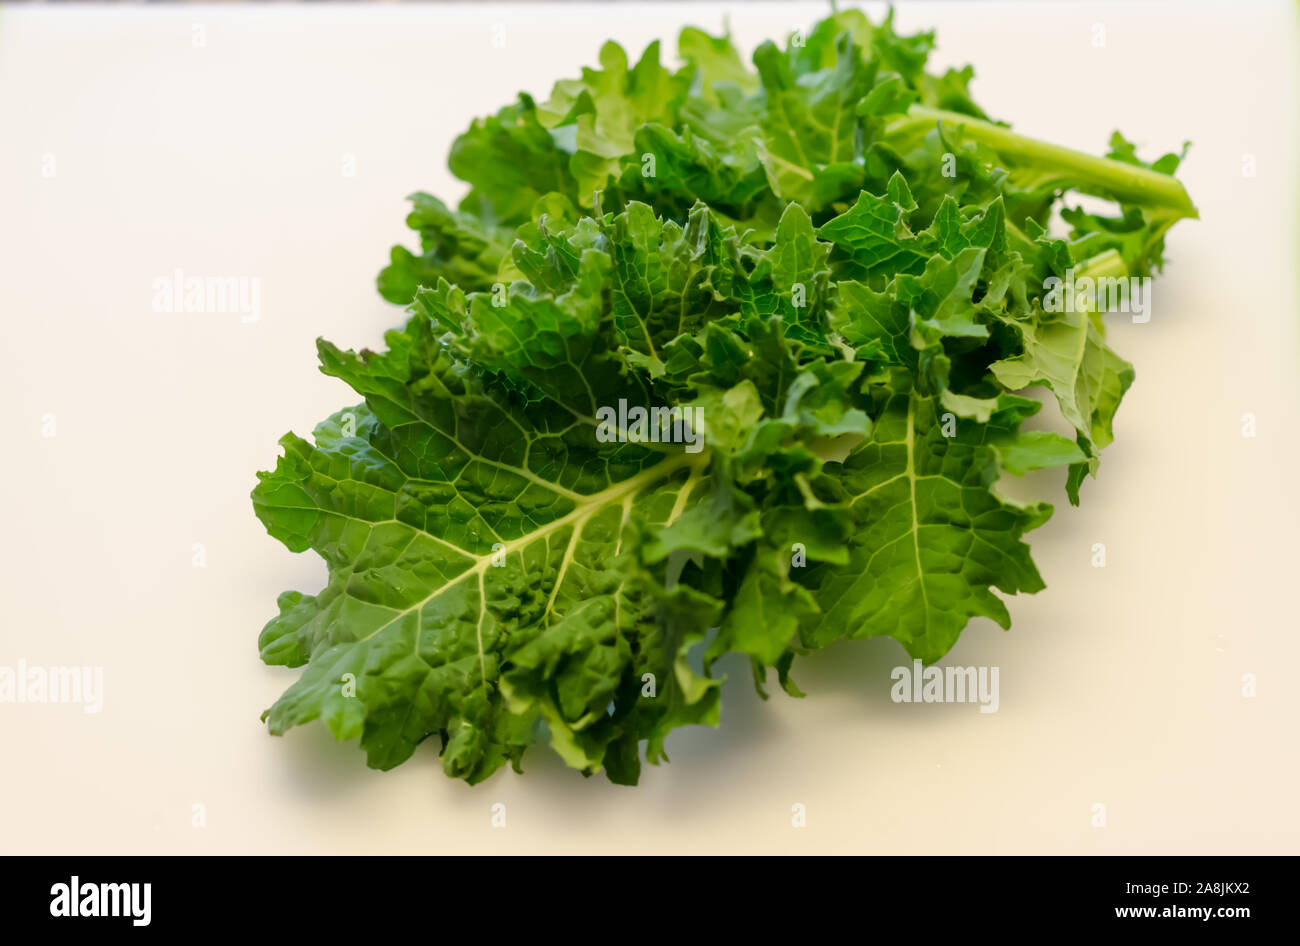 Fresh organic super food Kale leaf.  Homegrown in vegetable garden. Delicious nutritious healthy leaf vegetable of dark greens. Stock Photo